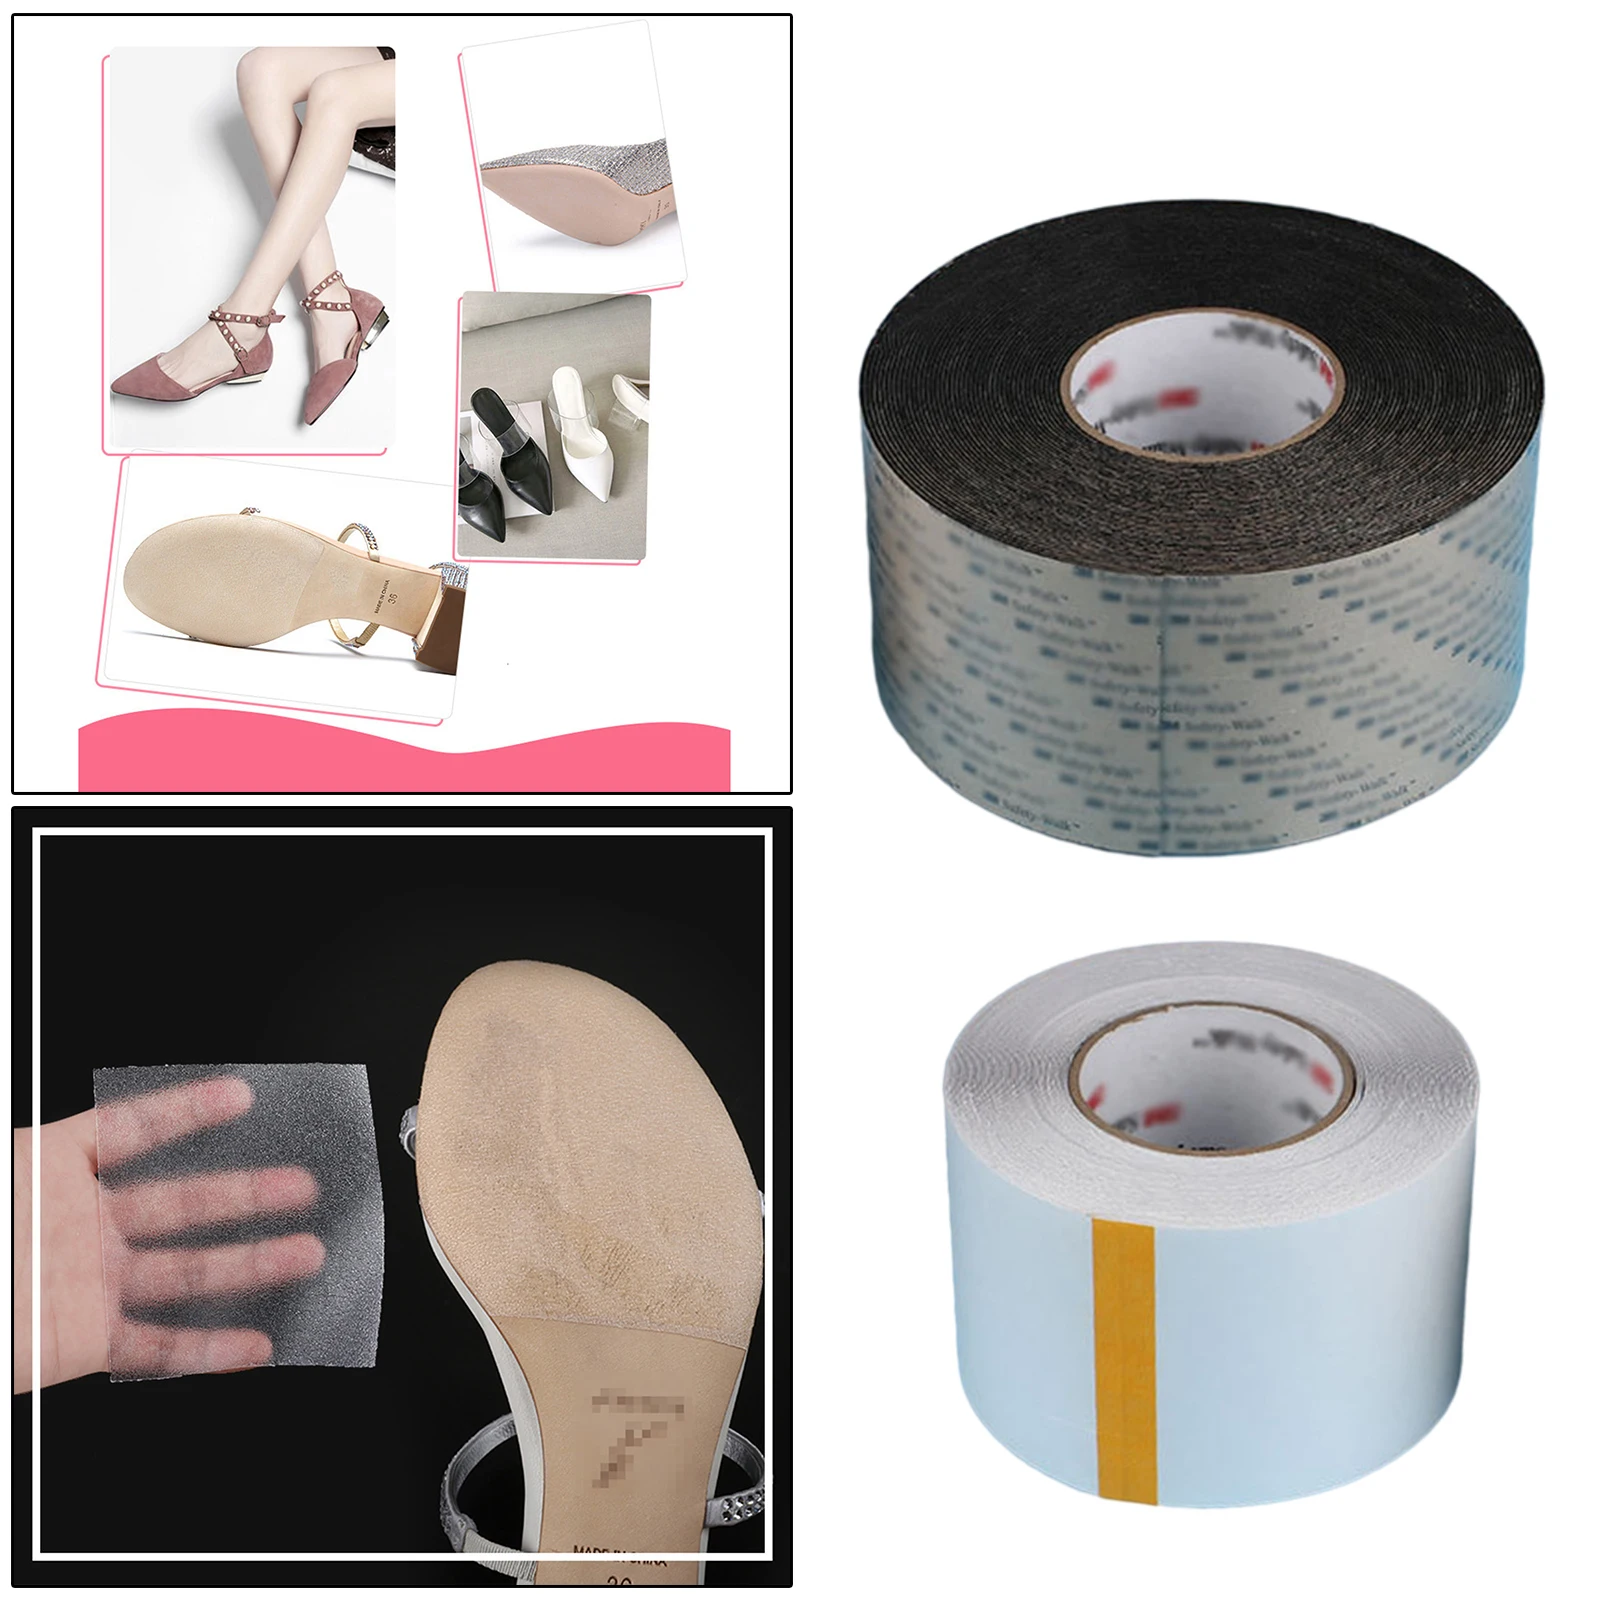 1 Roll Shoe Sole Stickers, Self-Adhesive Sole Cover Protectors for High Heels, Sneakers